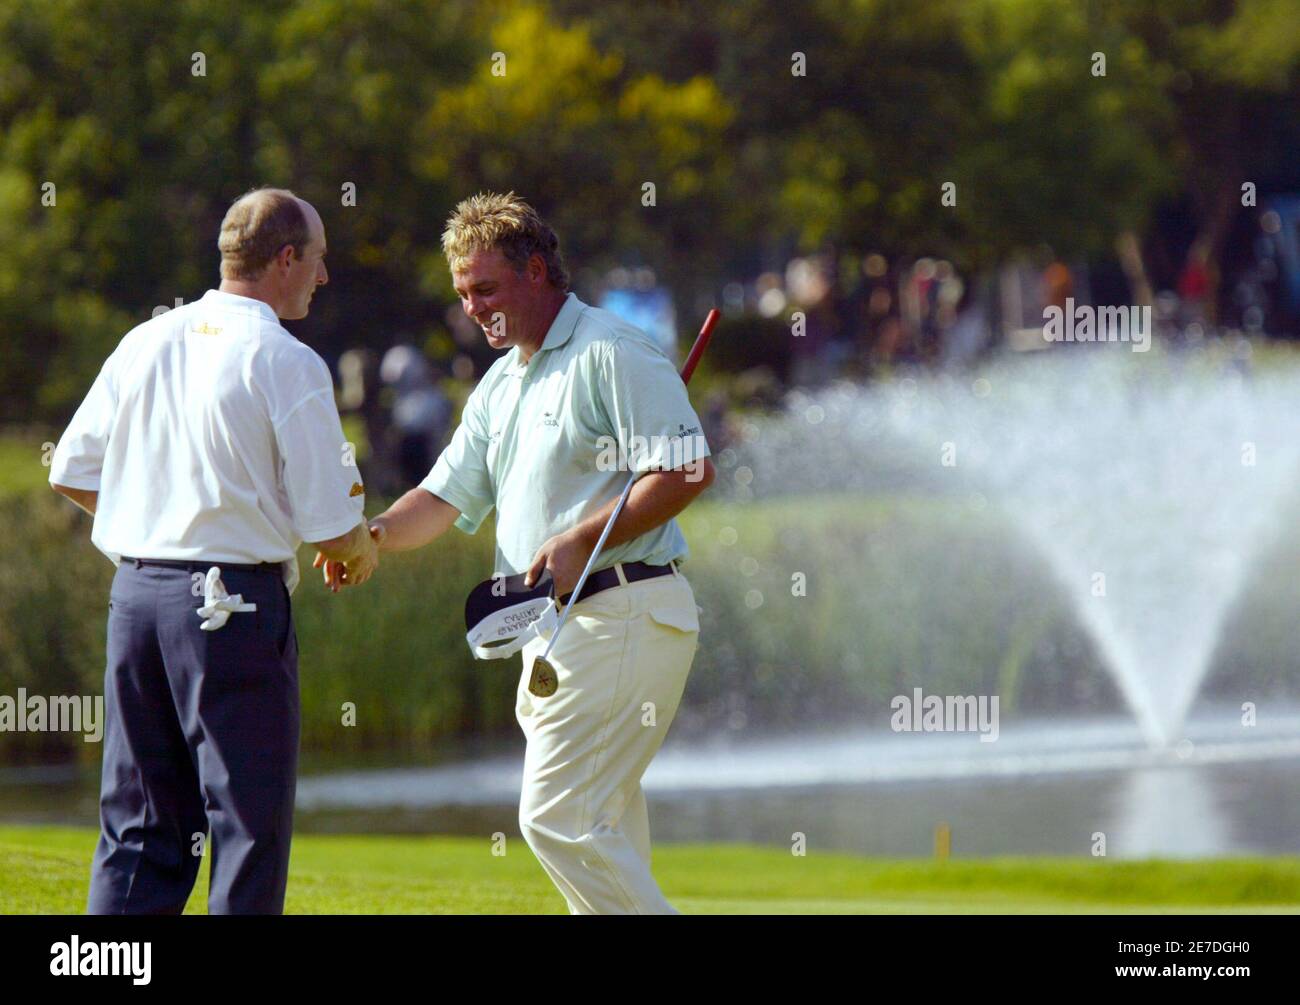 Jim Furyk (L) of the U.S. shakes hands with Britain's Darren Clarke (R) at the 18th hole during the second round of the $4 million Sun City Golf Challenge in Sun City, west of Johannesburg, in South Africa December 2, 2005. REUTERS/Juda Ngwenya Stock Photo